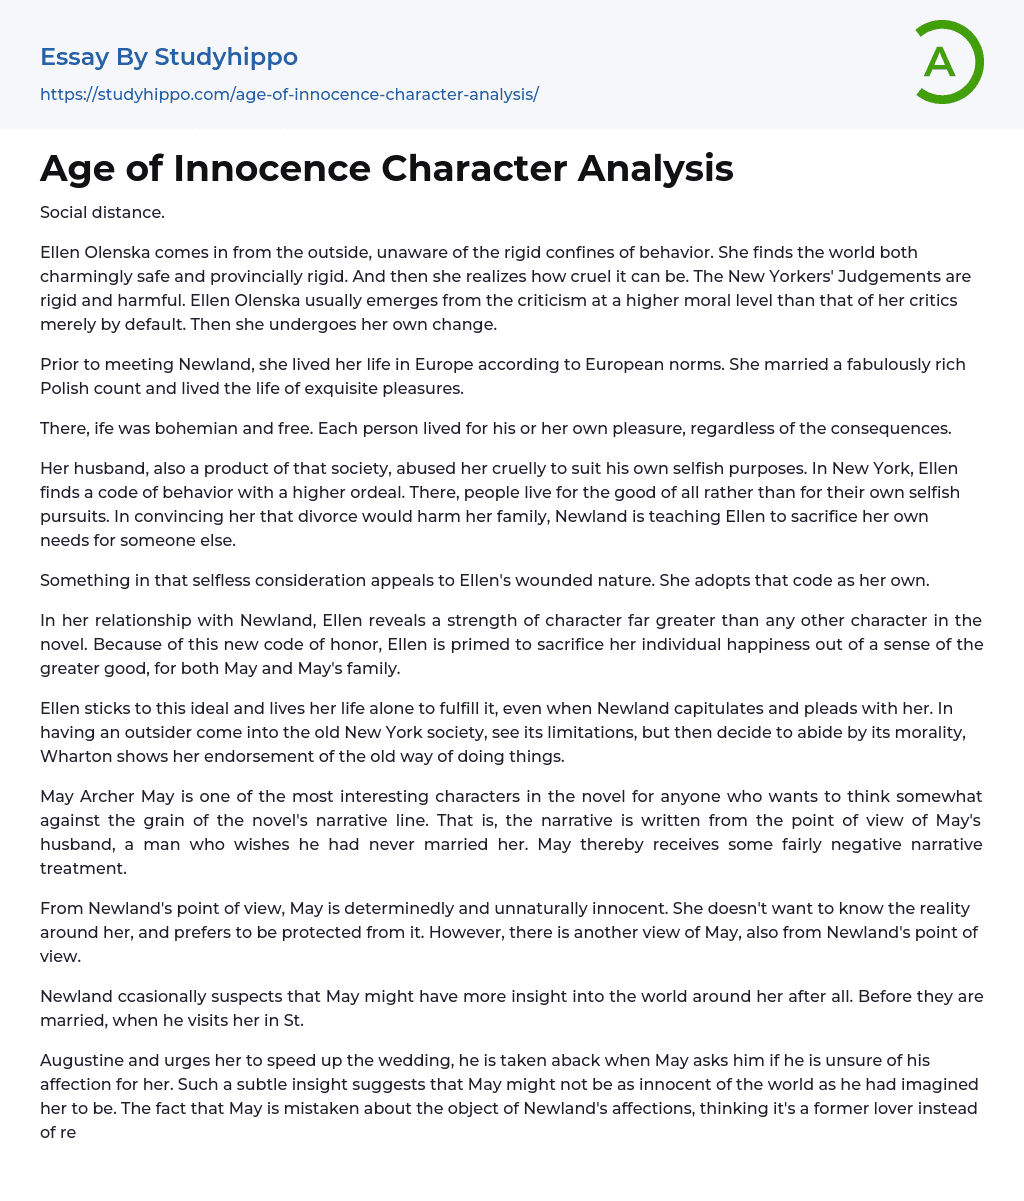 Age of Innocence Character Analysis Essay Example